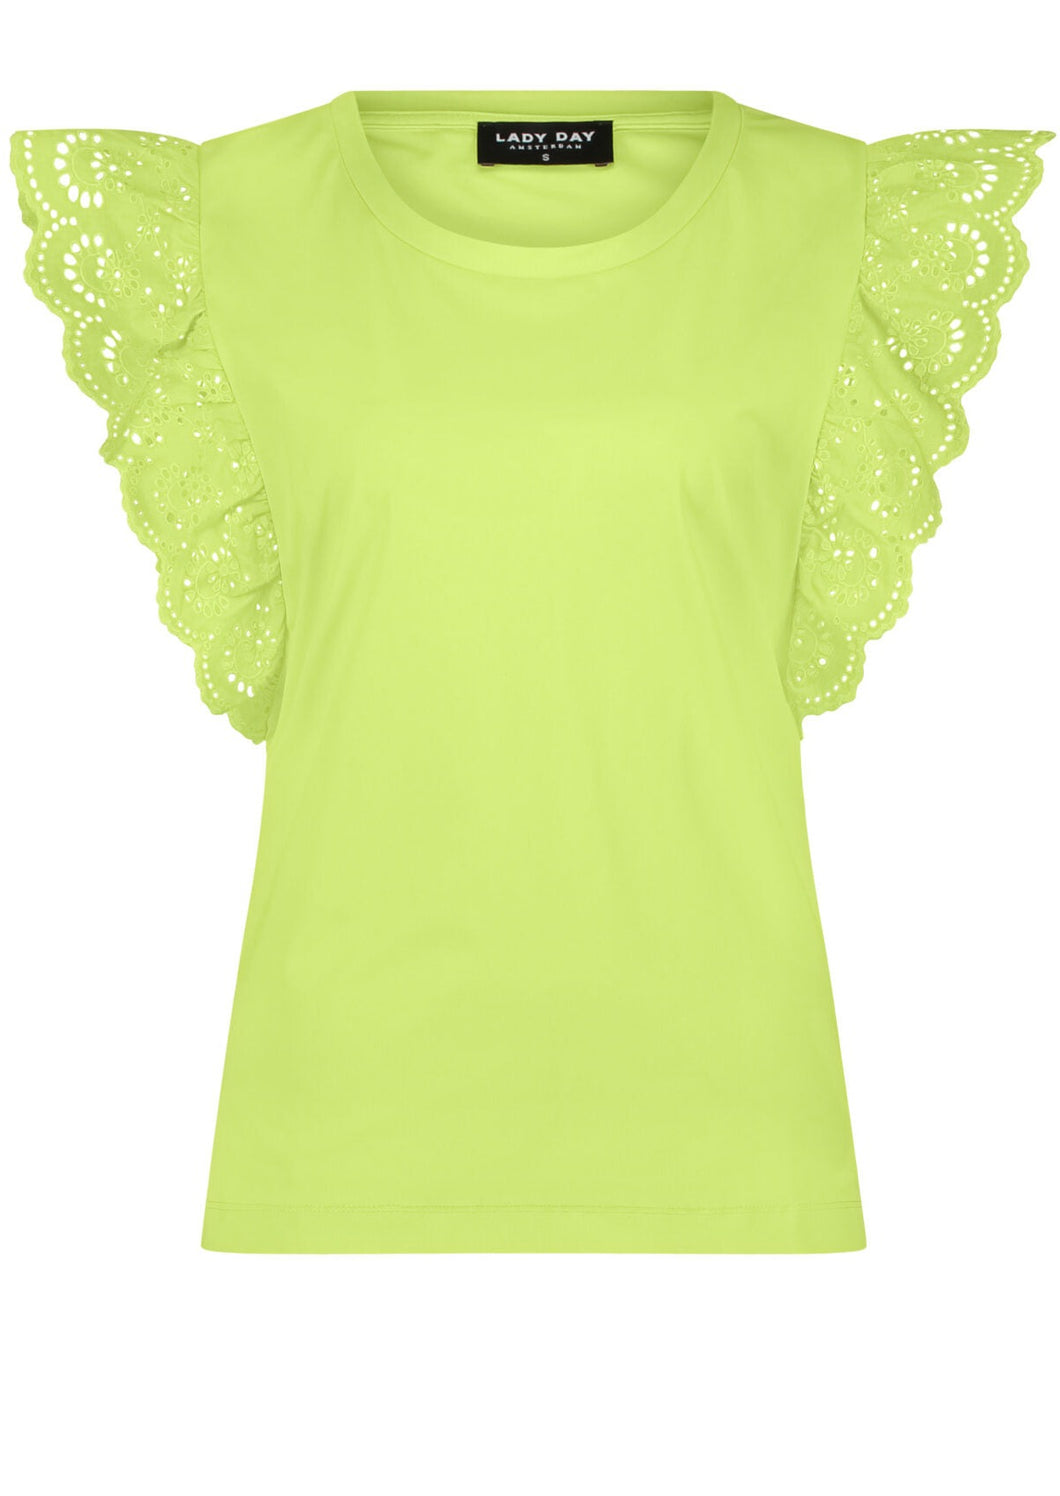 Lady Day top